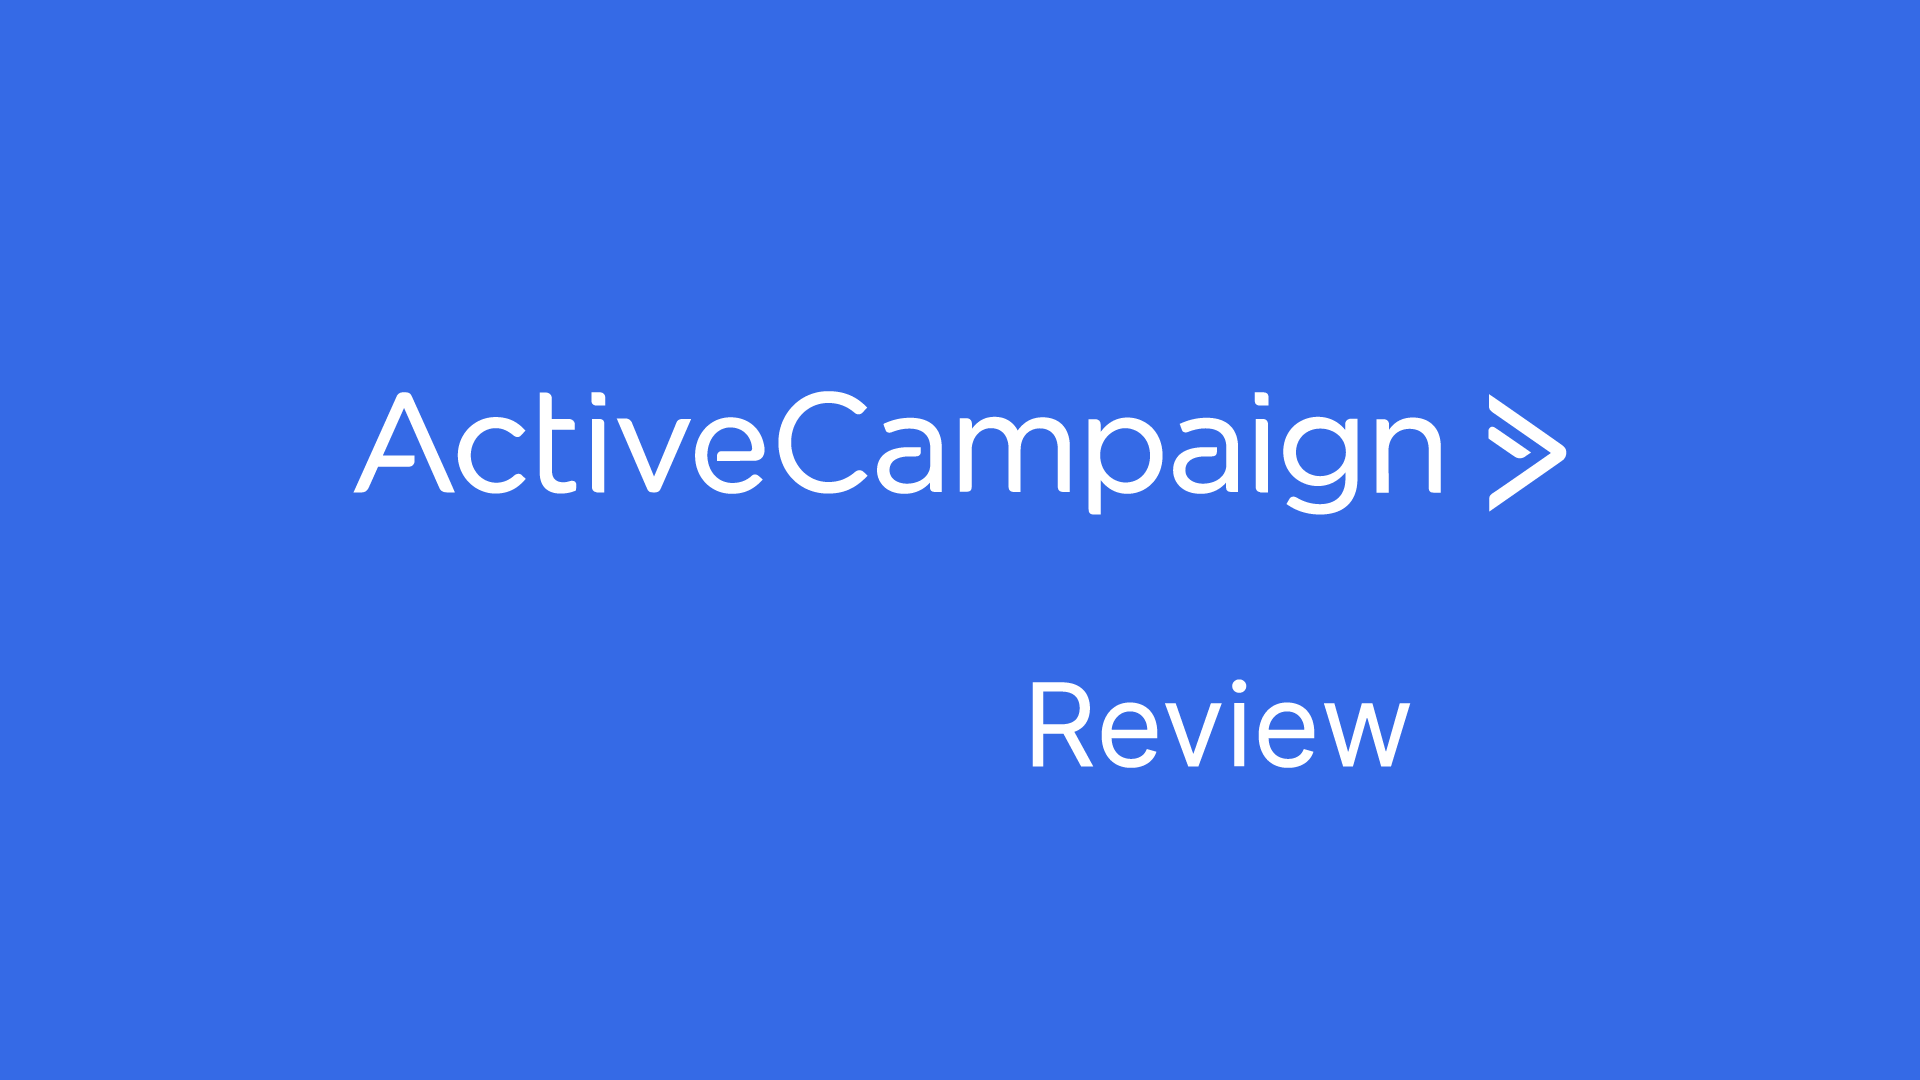 Activecampaign review full details